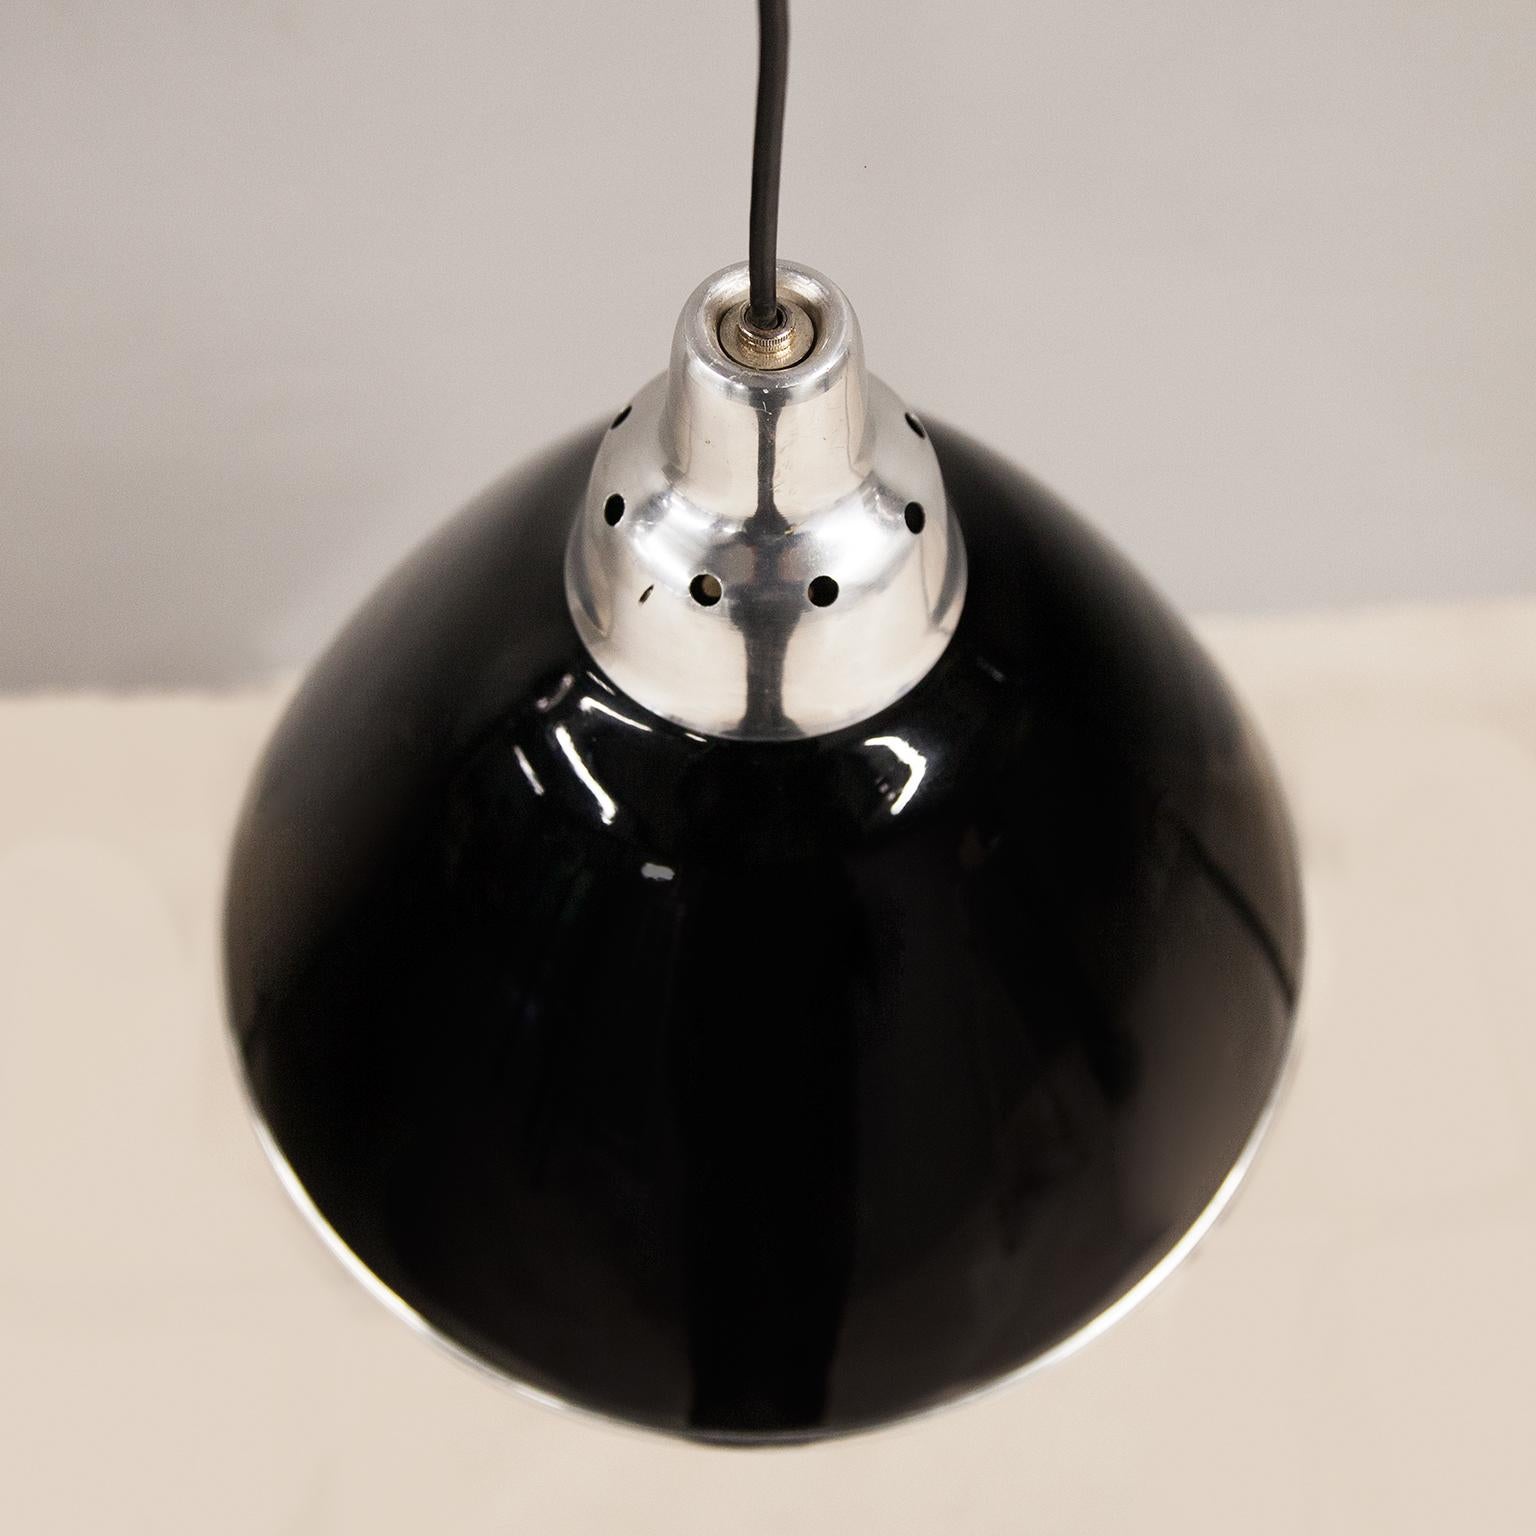 Cone shaped pendant lamp Headlight designed by Ingo Maurer and manufactured by Design M, Germany 1968. The shade is made of black lacquered metal and the diffuser is made of transparent plastic and has a E27 socket. The headlight is out of